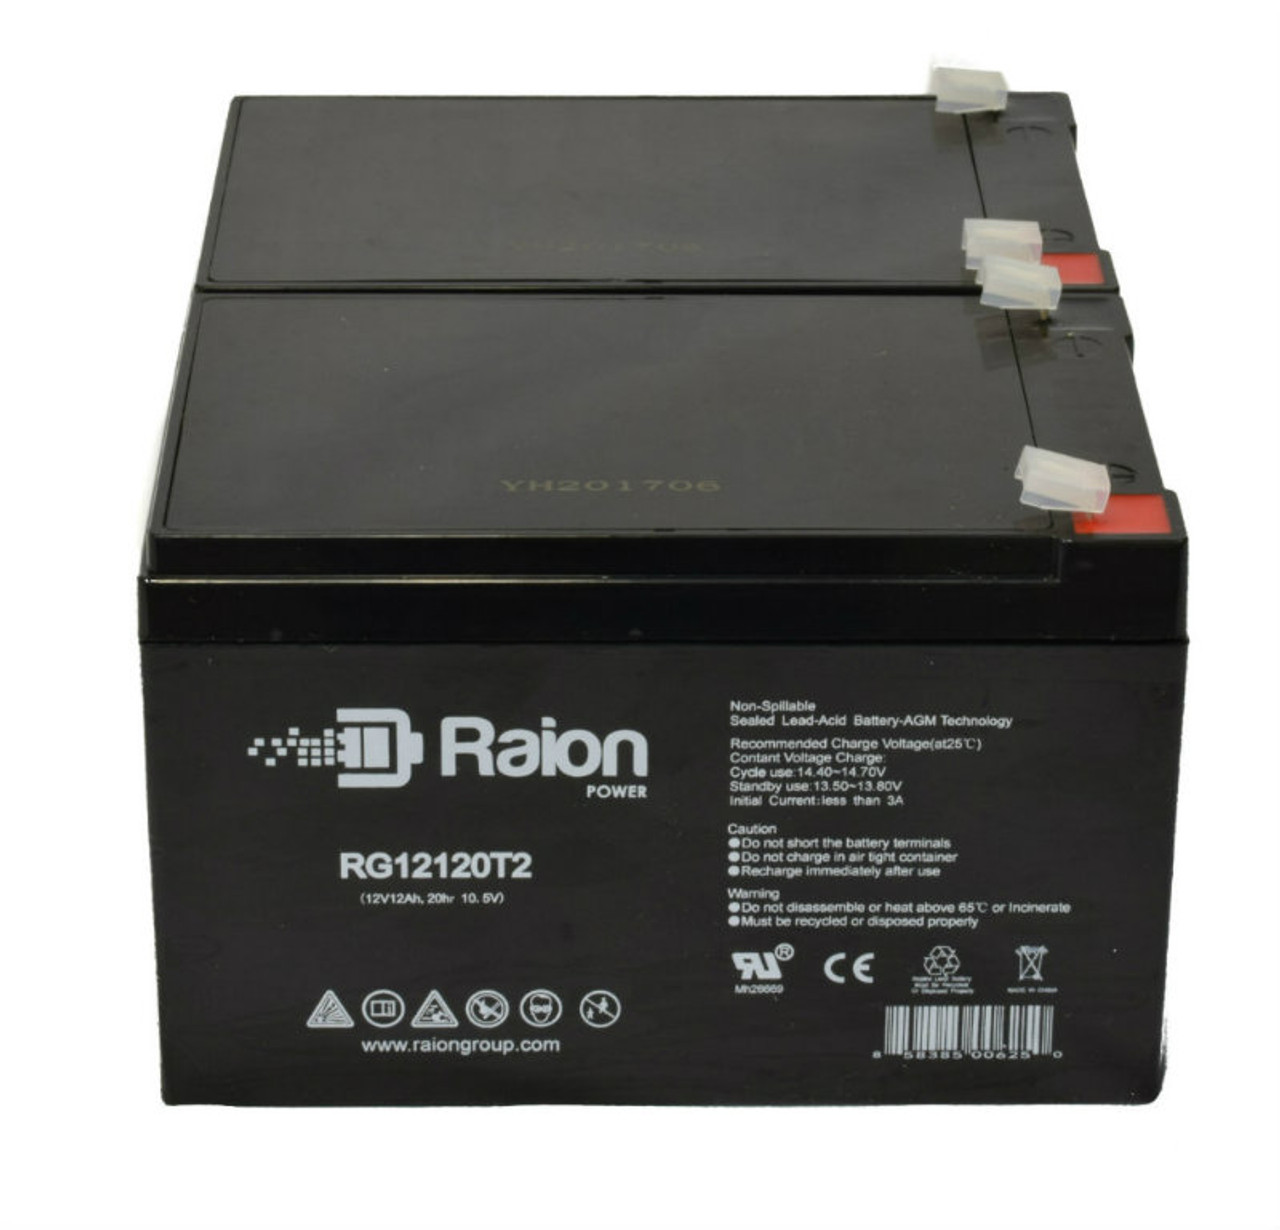 Raion Power 12V 12Ah Non-Spillable Compatible Replacement Battery for KIJO JS12-10 - (2 Pack)